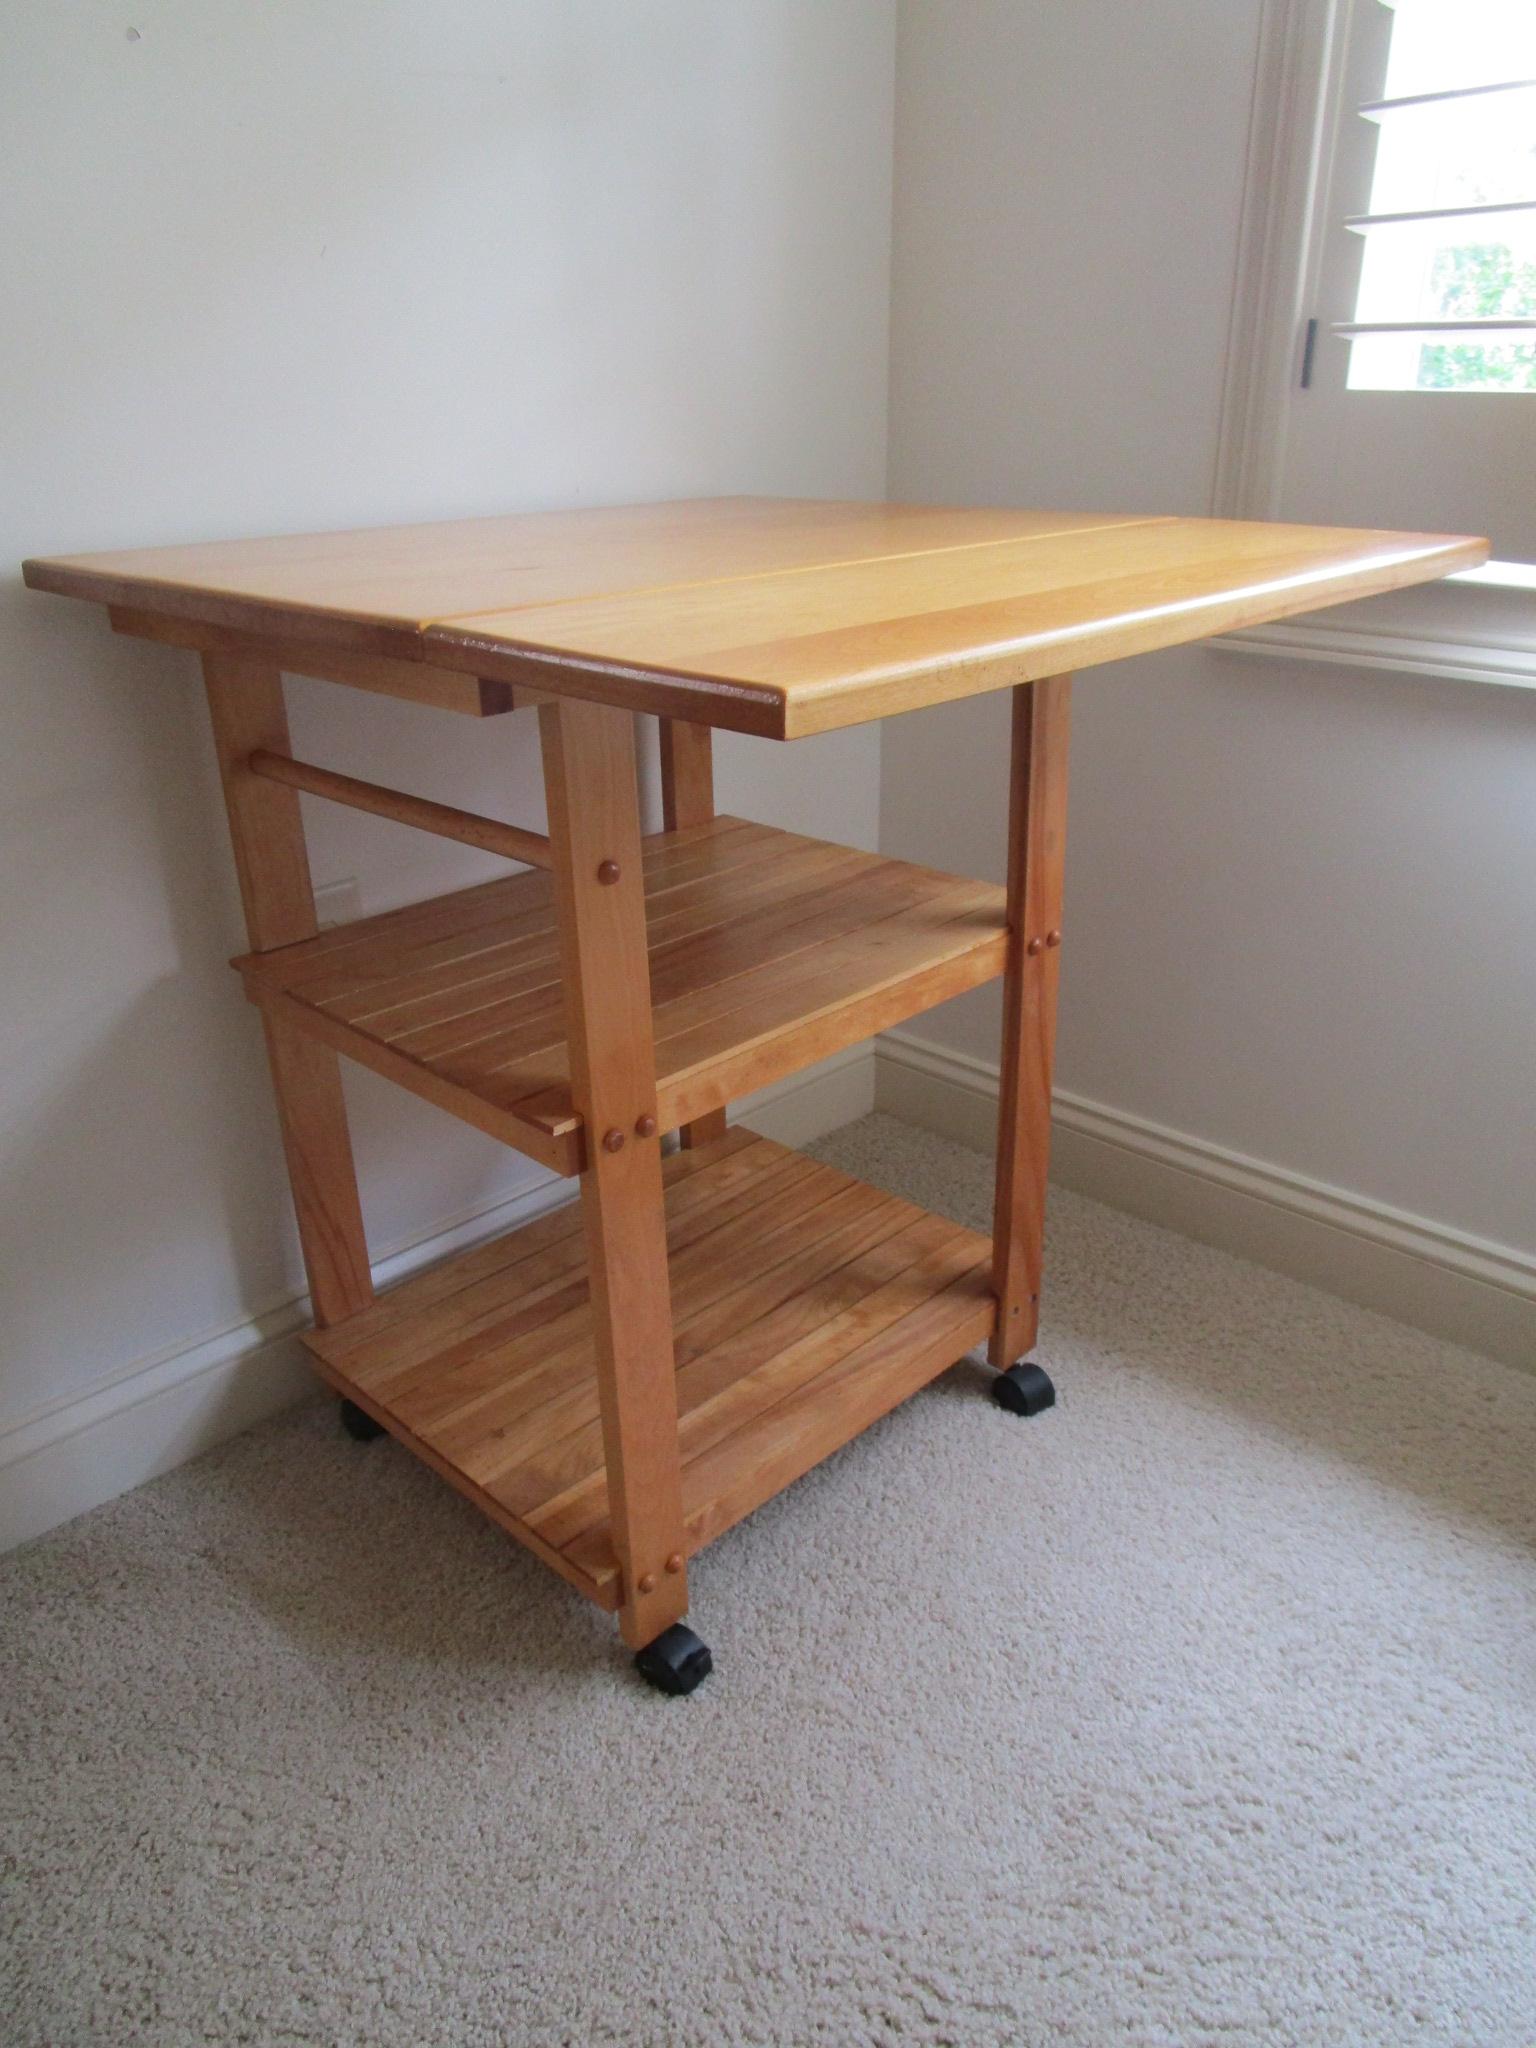 Pine Microwave Stand on Casters 2/One Drop Leaf.  30" T x 27" W x 19" D.